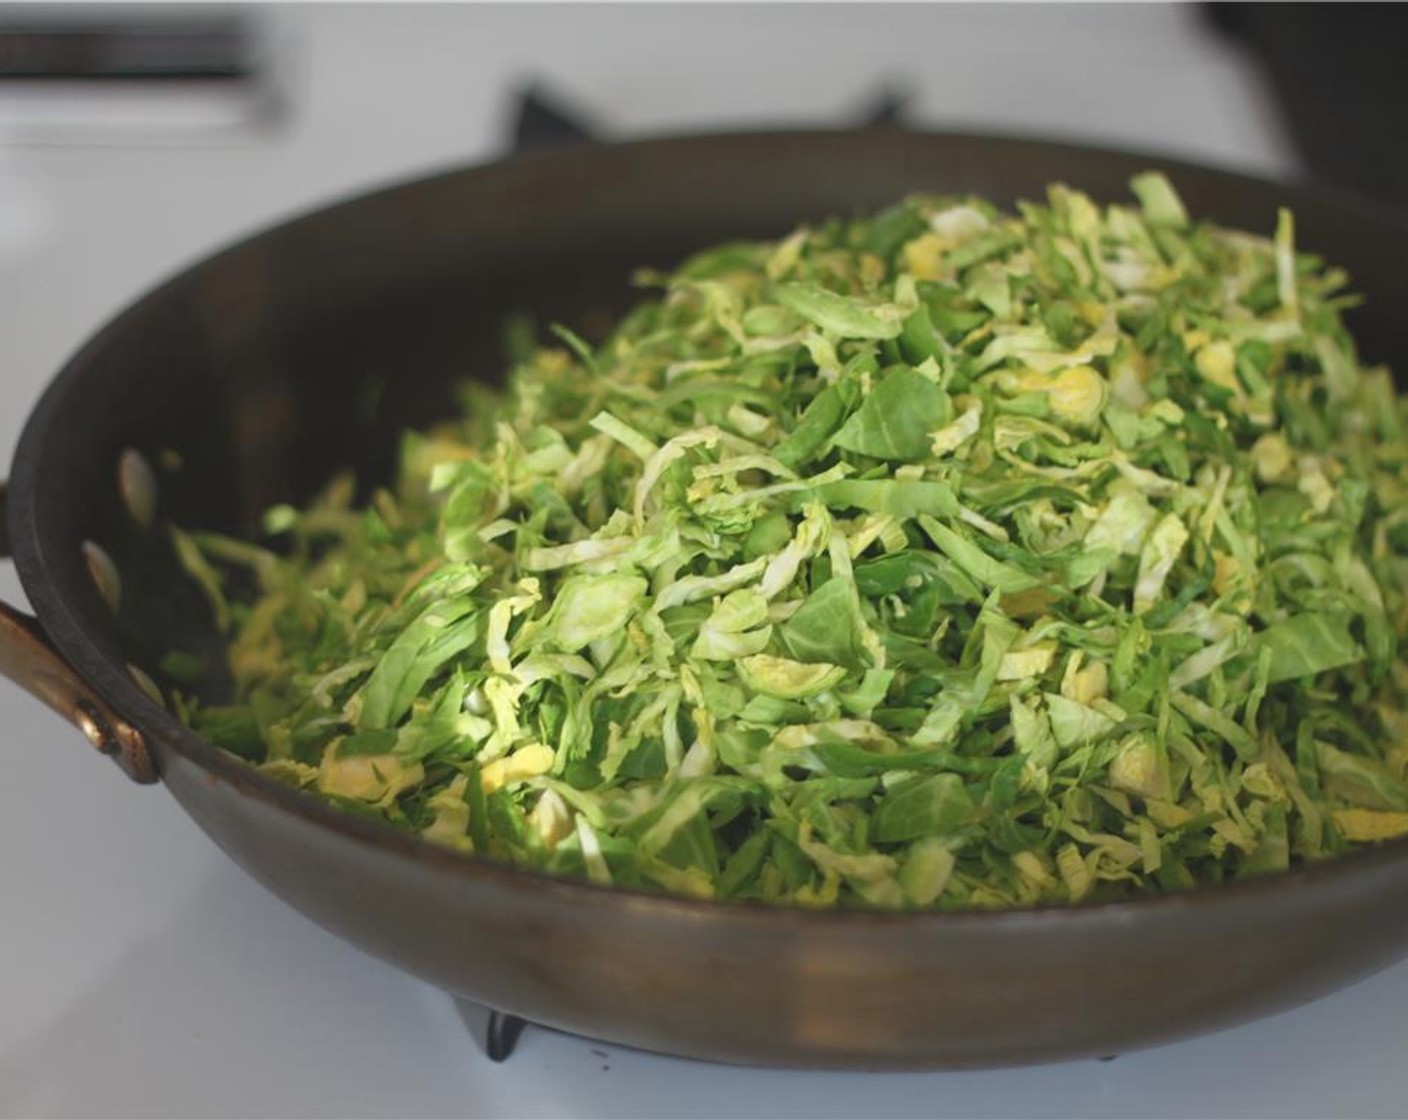 step 3 Over low heat, warm up a little olive oil in a large pan.  Add the shredded brussels sprouts and continuously stir over low heat until warmed through.  This will brighten and the color and the flavor.